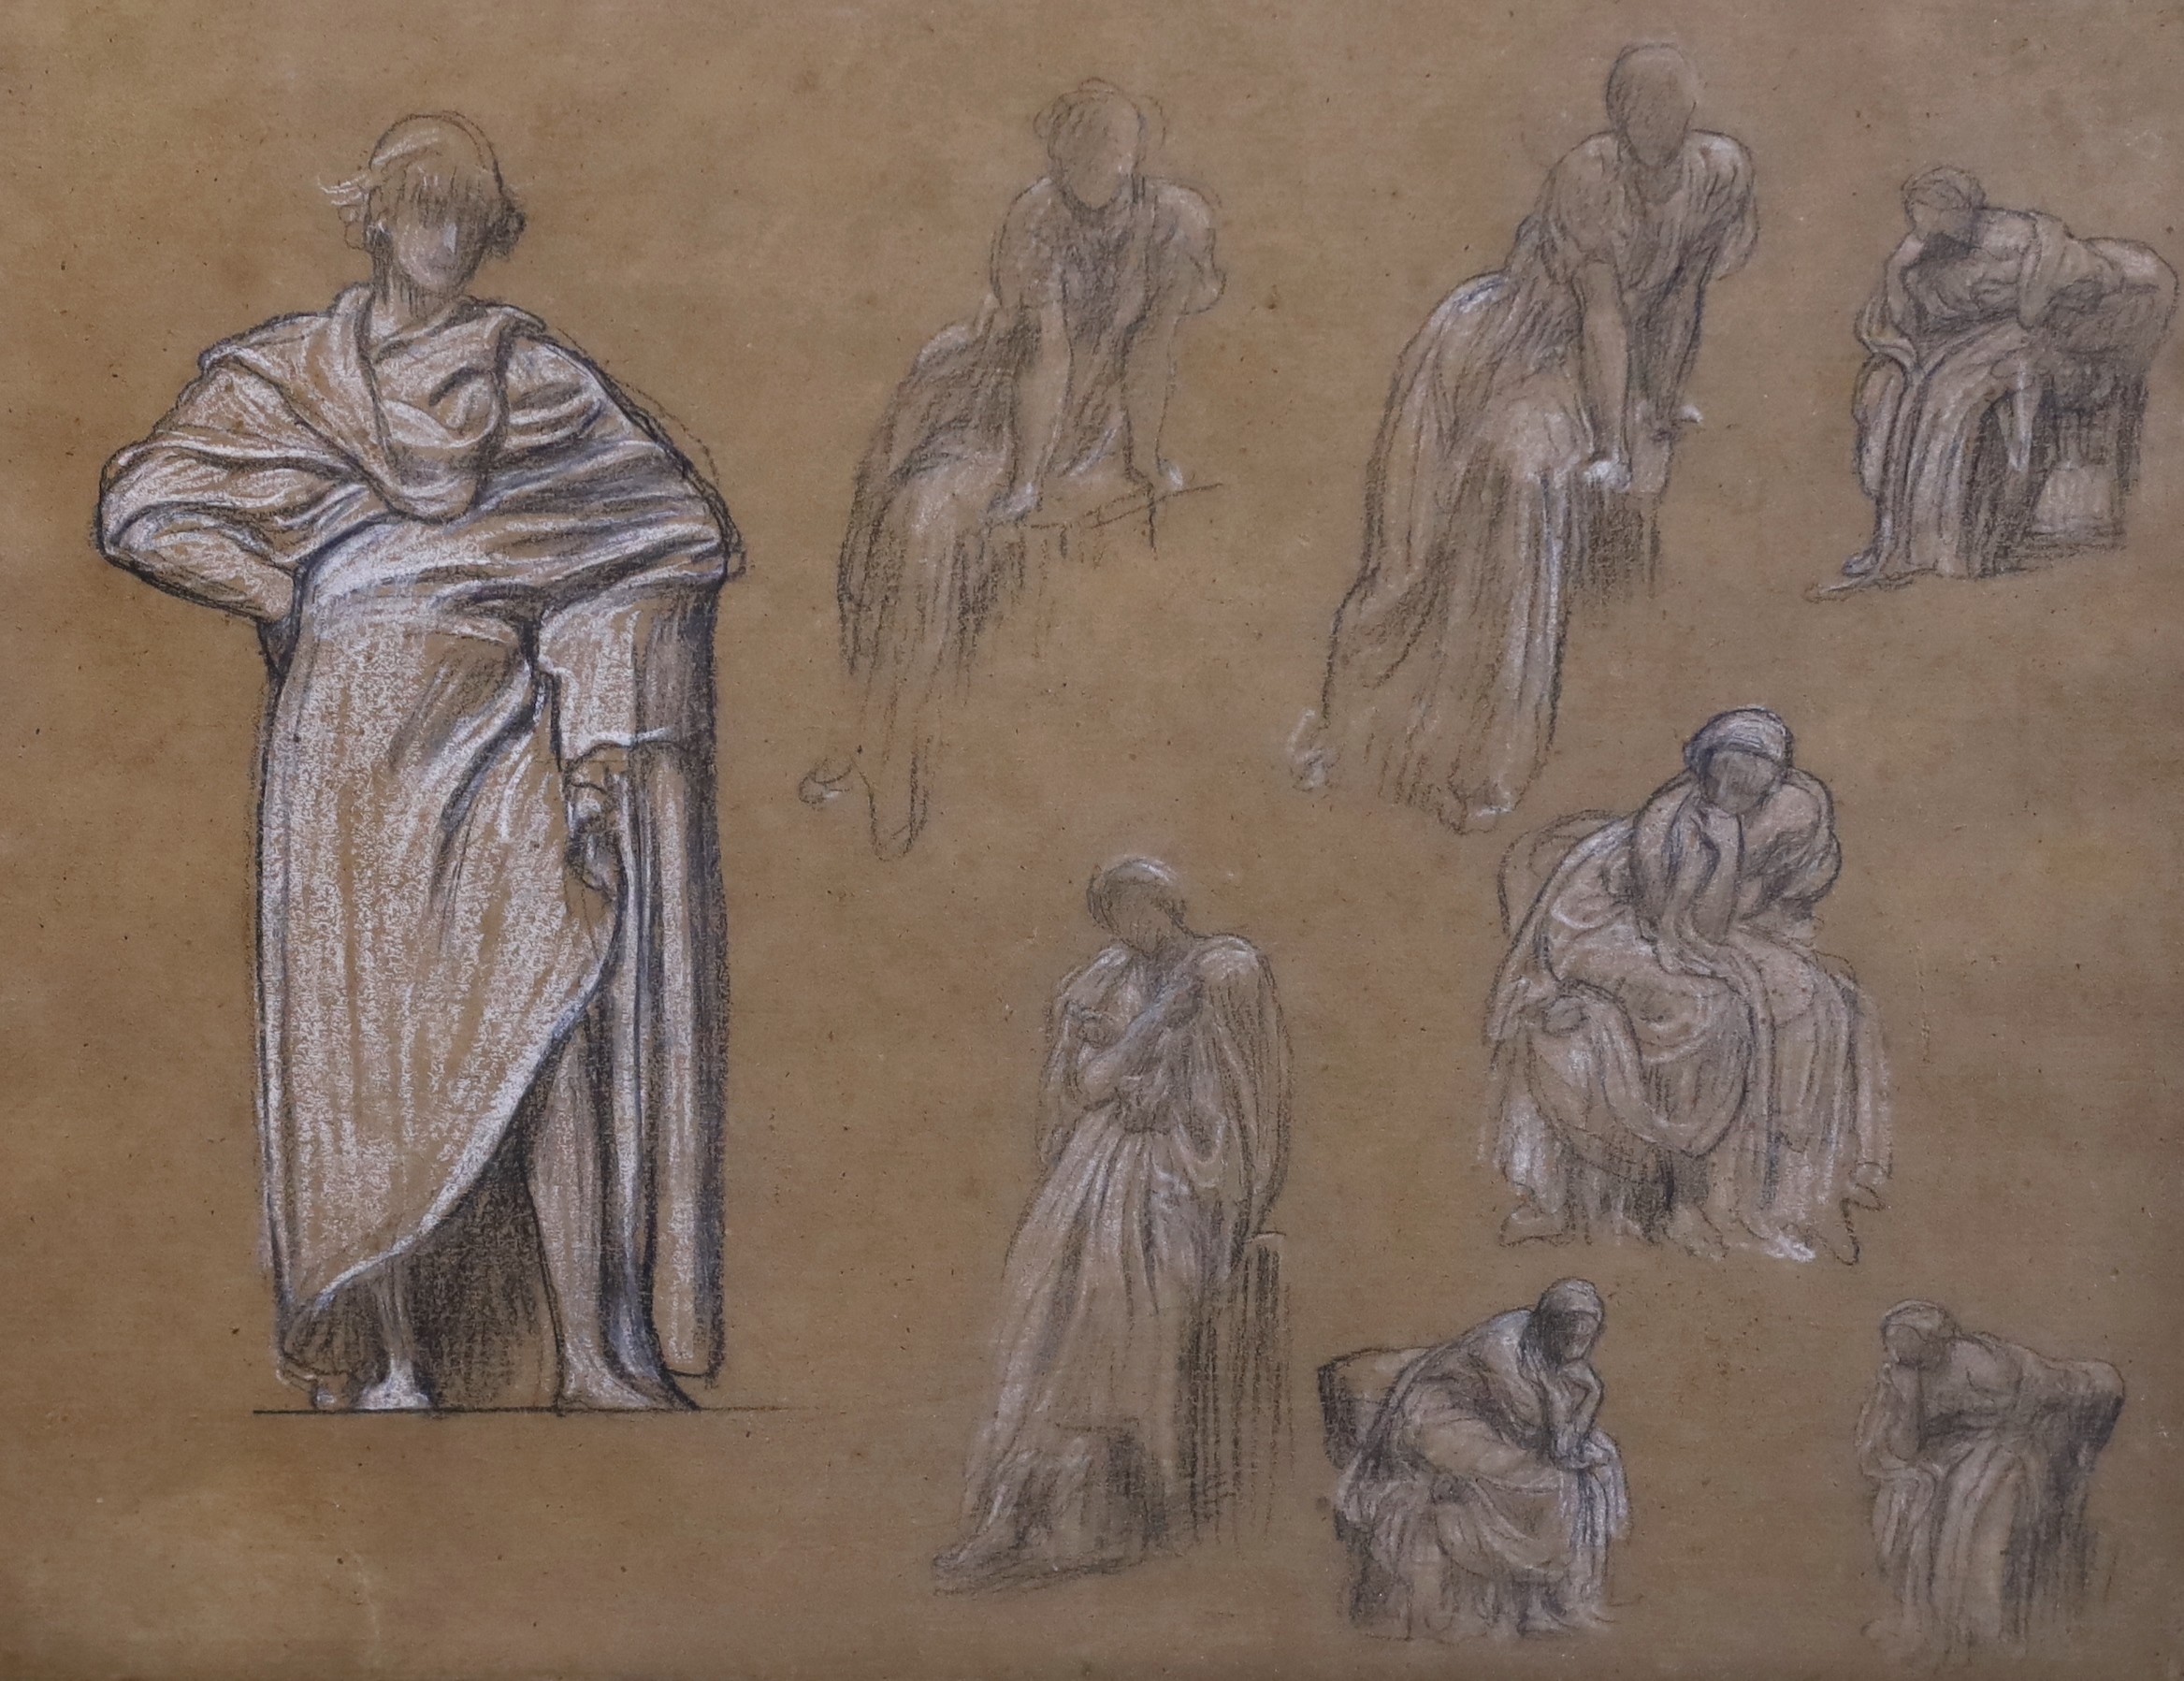 Lord Frederic Leighton, P.R.A. (British, 1830-1896), Studies for Music (a Frieze) for No. 1 Audley Street, black and white chalk on sepia paper, 26 x 34.5cm